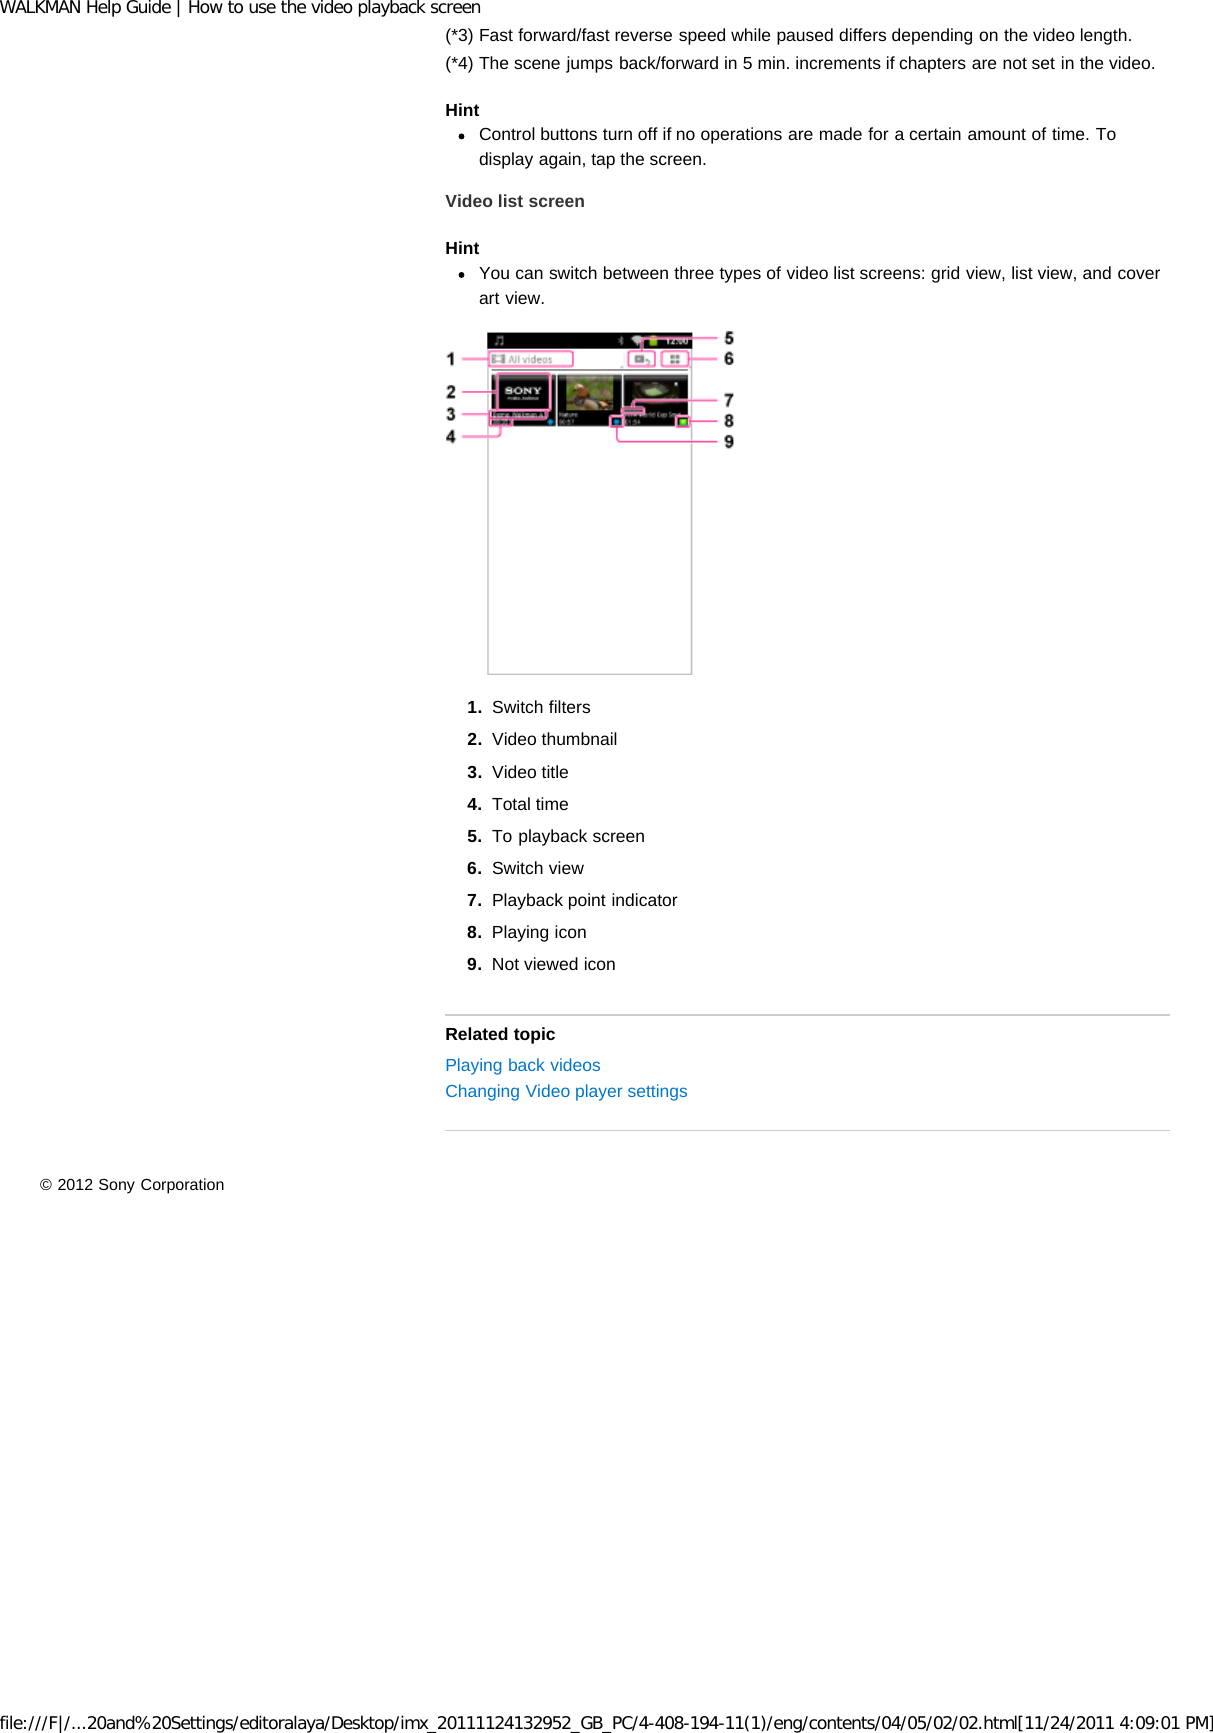 Page 192 of Sony Group NWZZ1000 Digital Media Player User Manual WALKMAN Help Guide   Top page